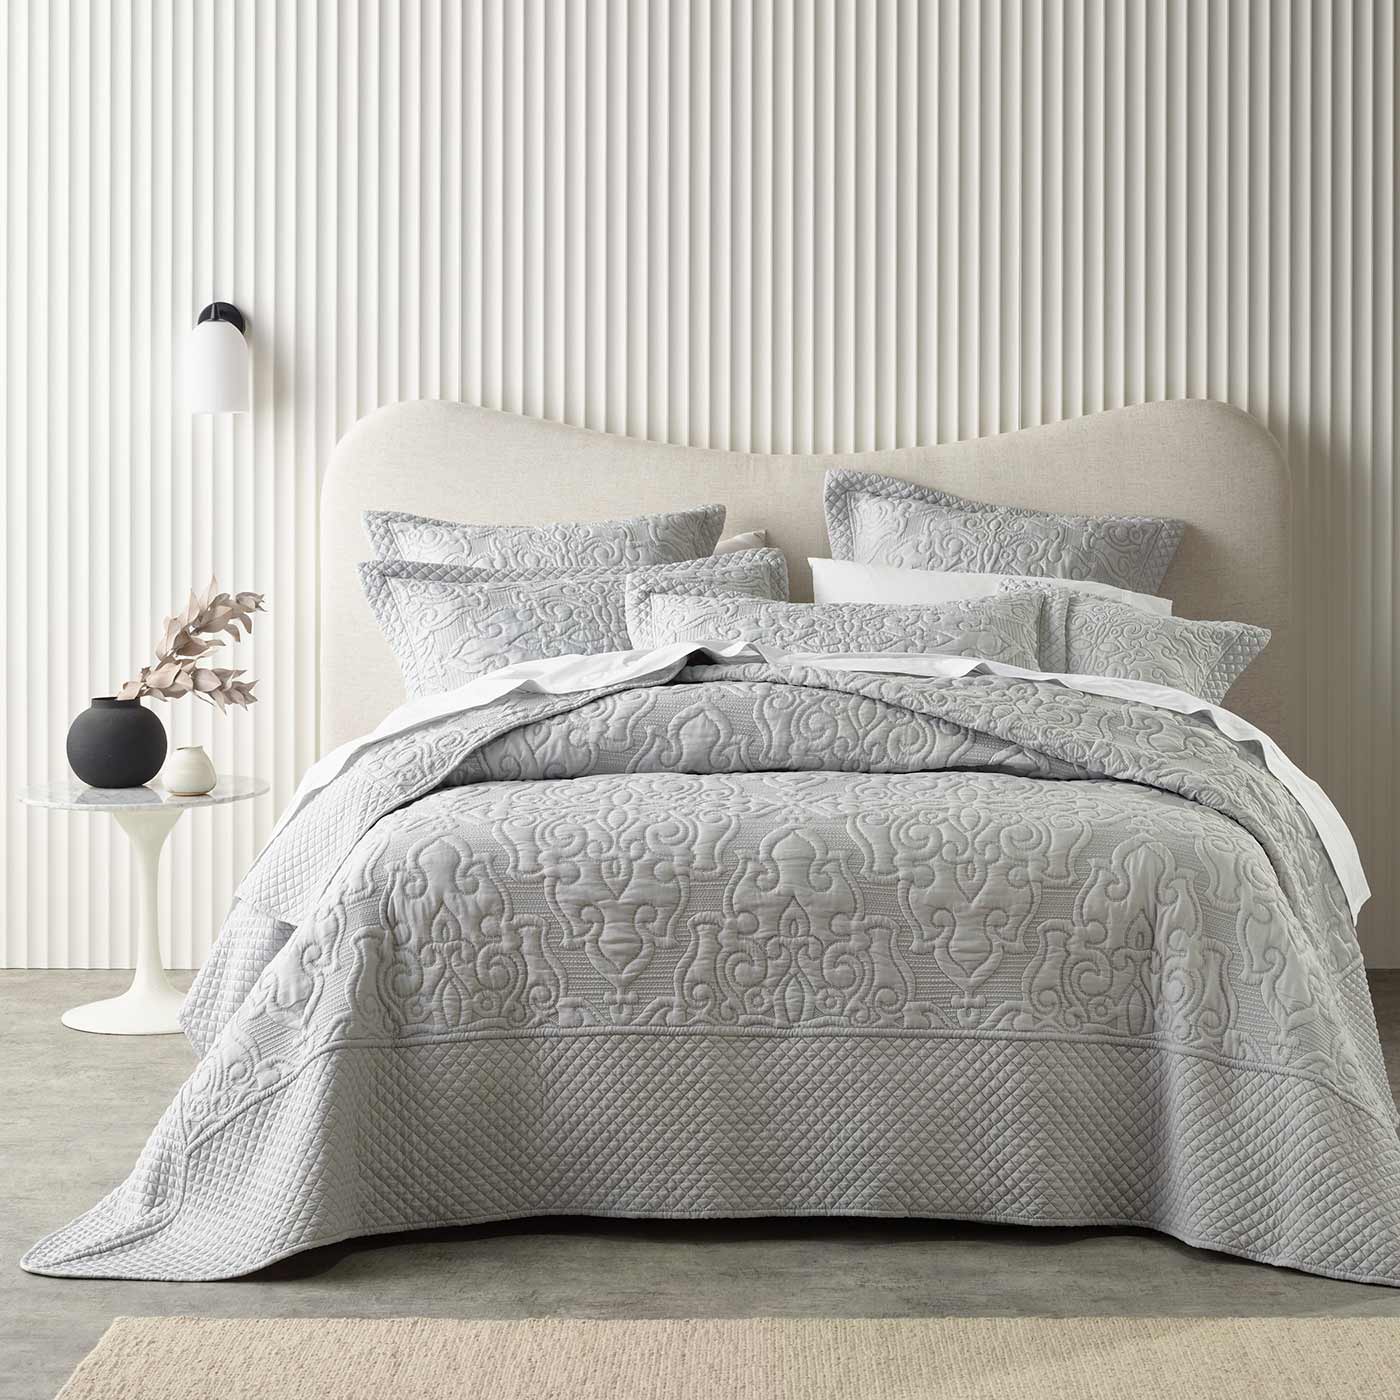 The Laurent bedspread will add class and sophistication to your bedroom. A beautiful damask design finished with an elegant diamond quilted border. A bedspread for the discerning and will be cherished for many years to come.